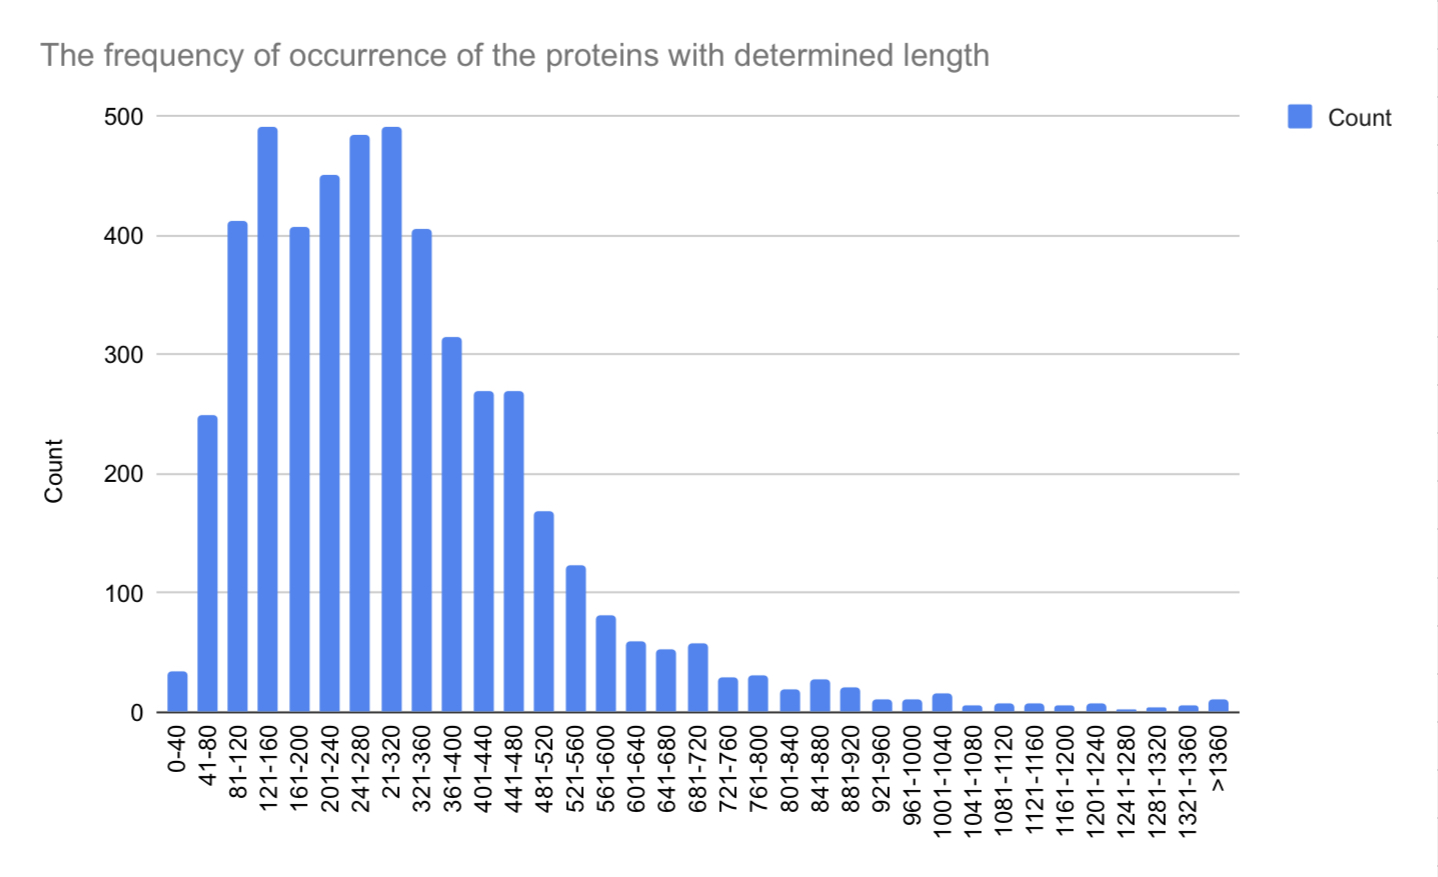 The frequency of occurrence of the proteins with determined length